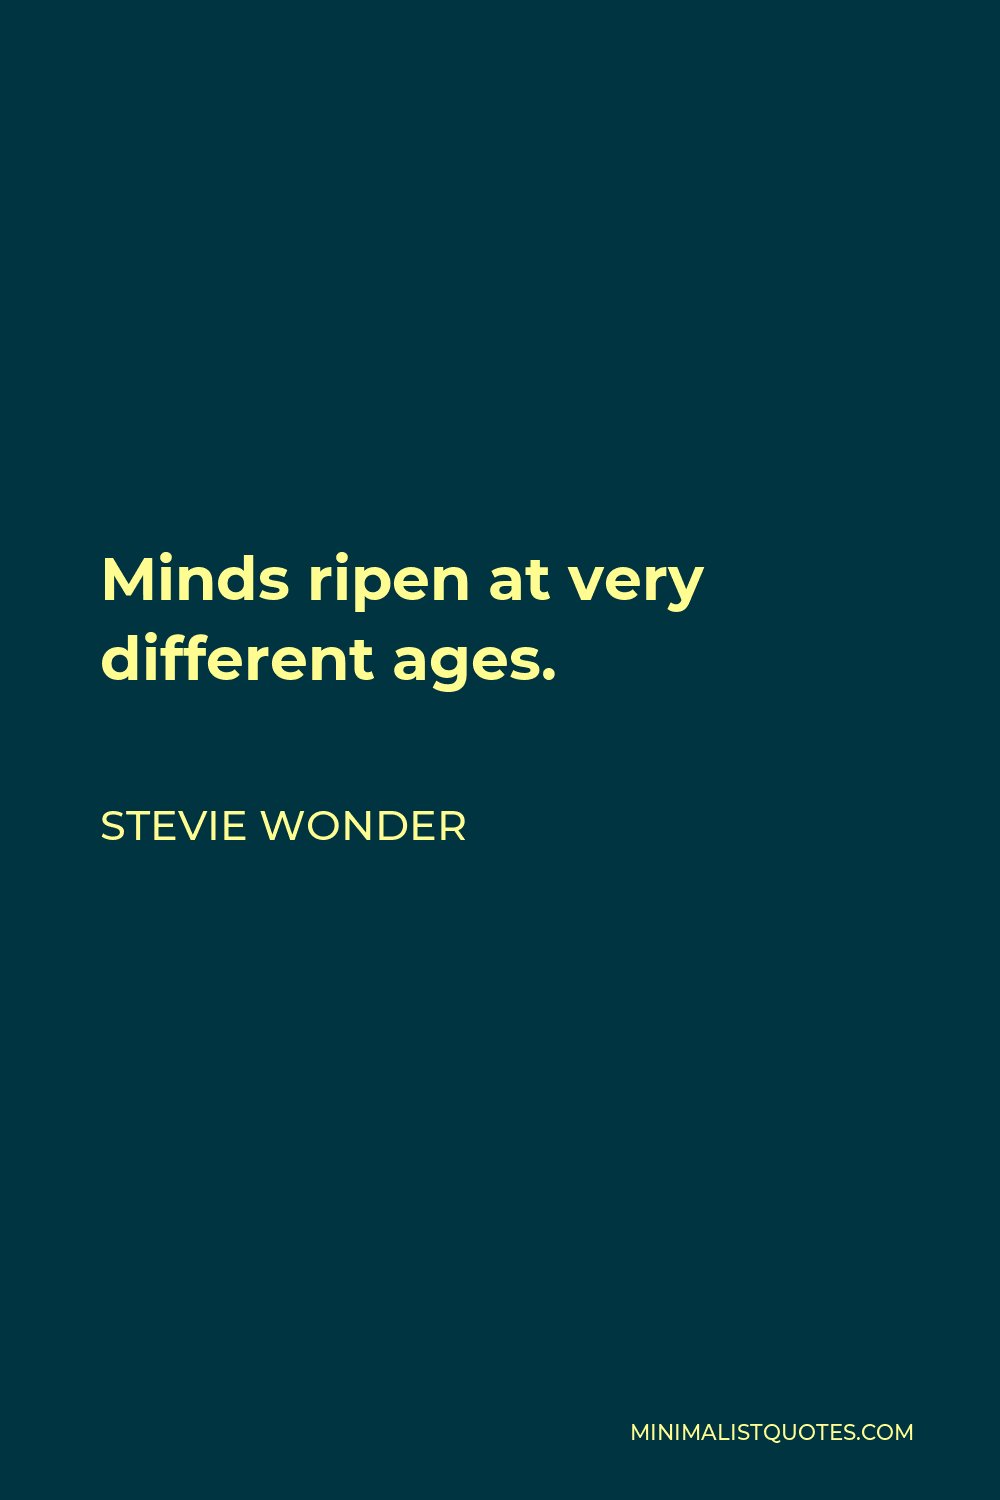 Stevie Wonder Quote - Minds ripen at very different ages.